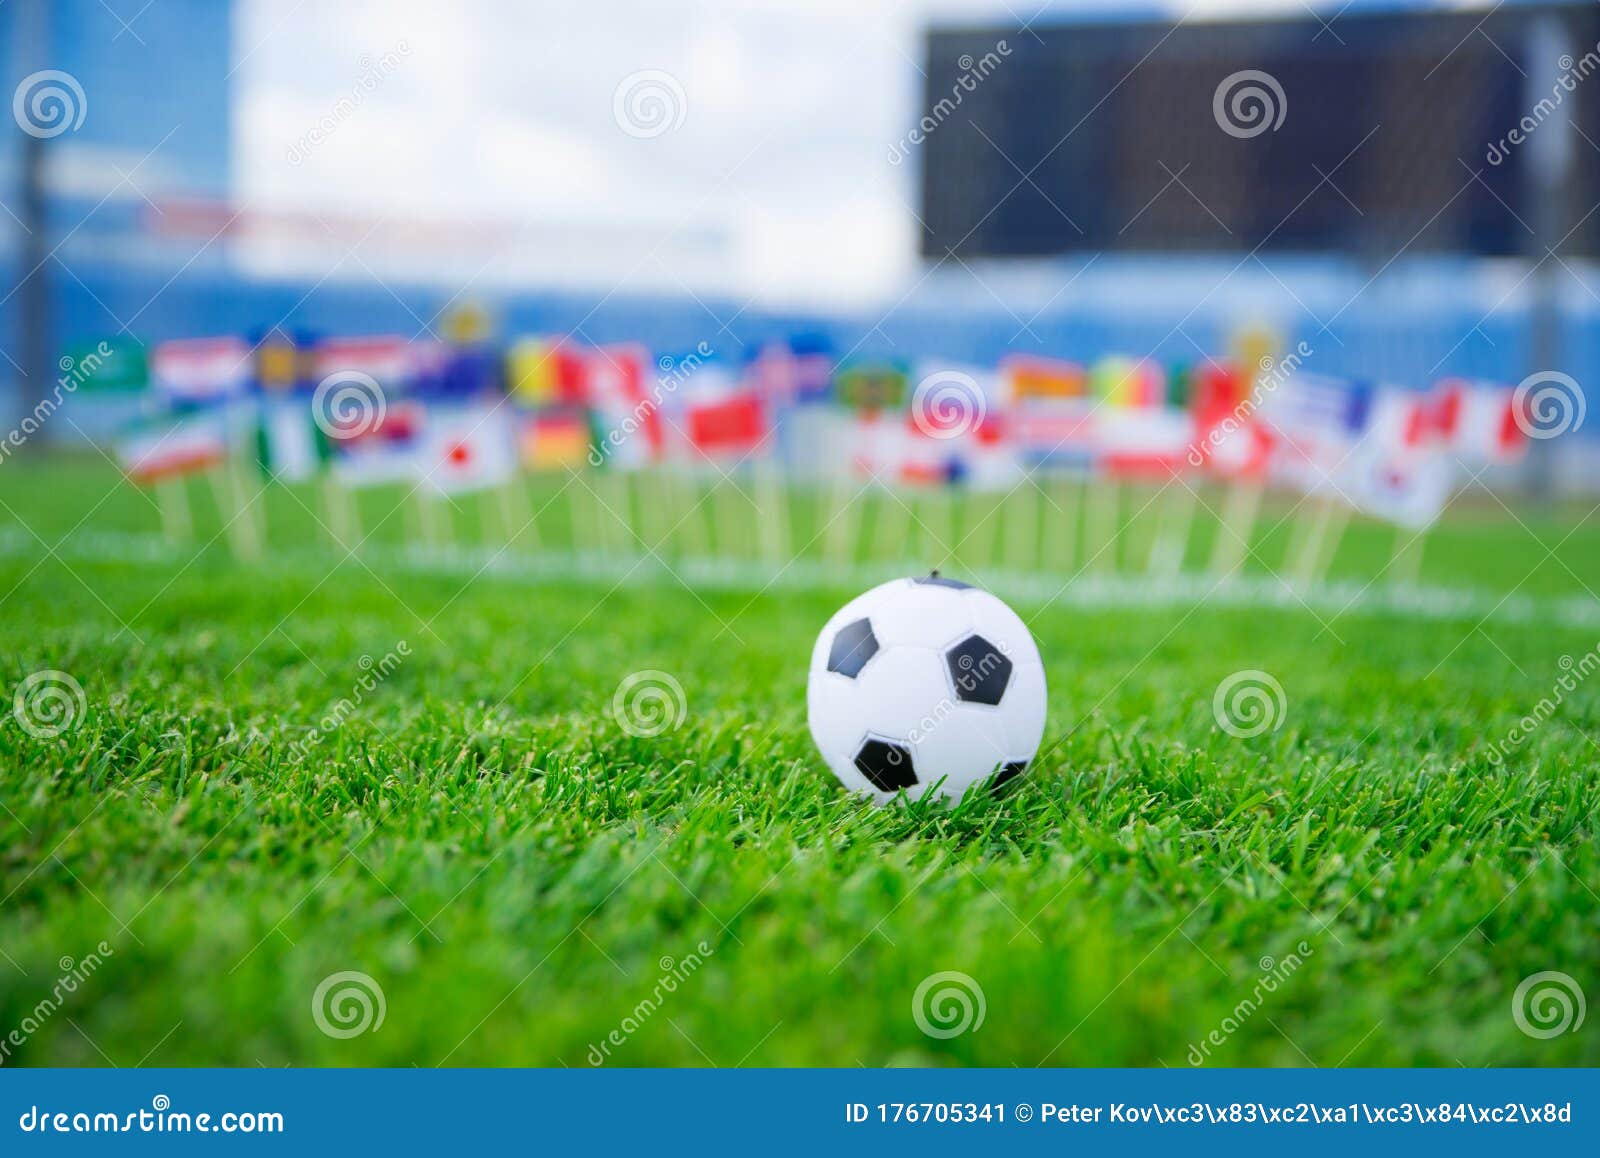 Football Pitch, World Nations Flags, Blue Sky, Football Net in Background.  Sport Photo, Edit Space Stock Illustration - Illustration of argentina,  england: 176705341